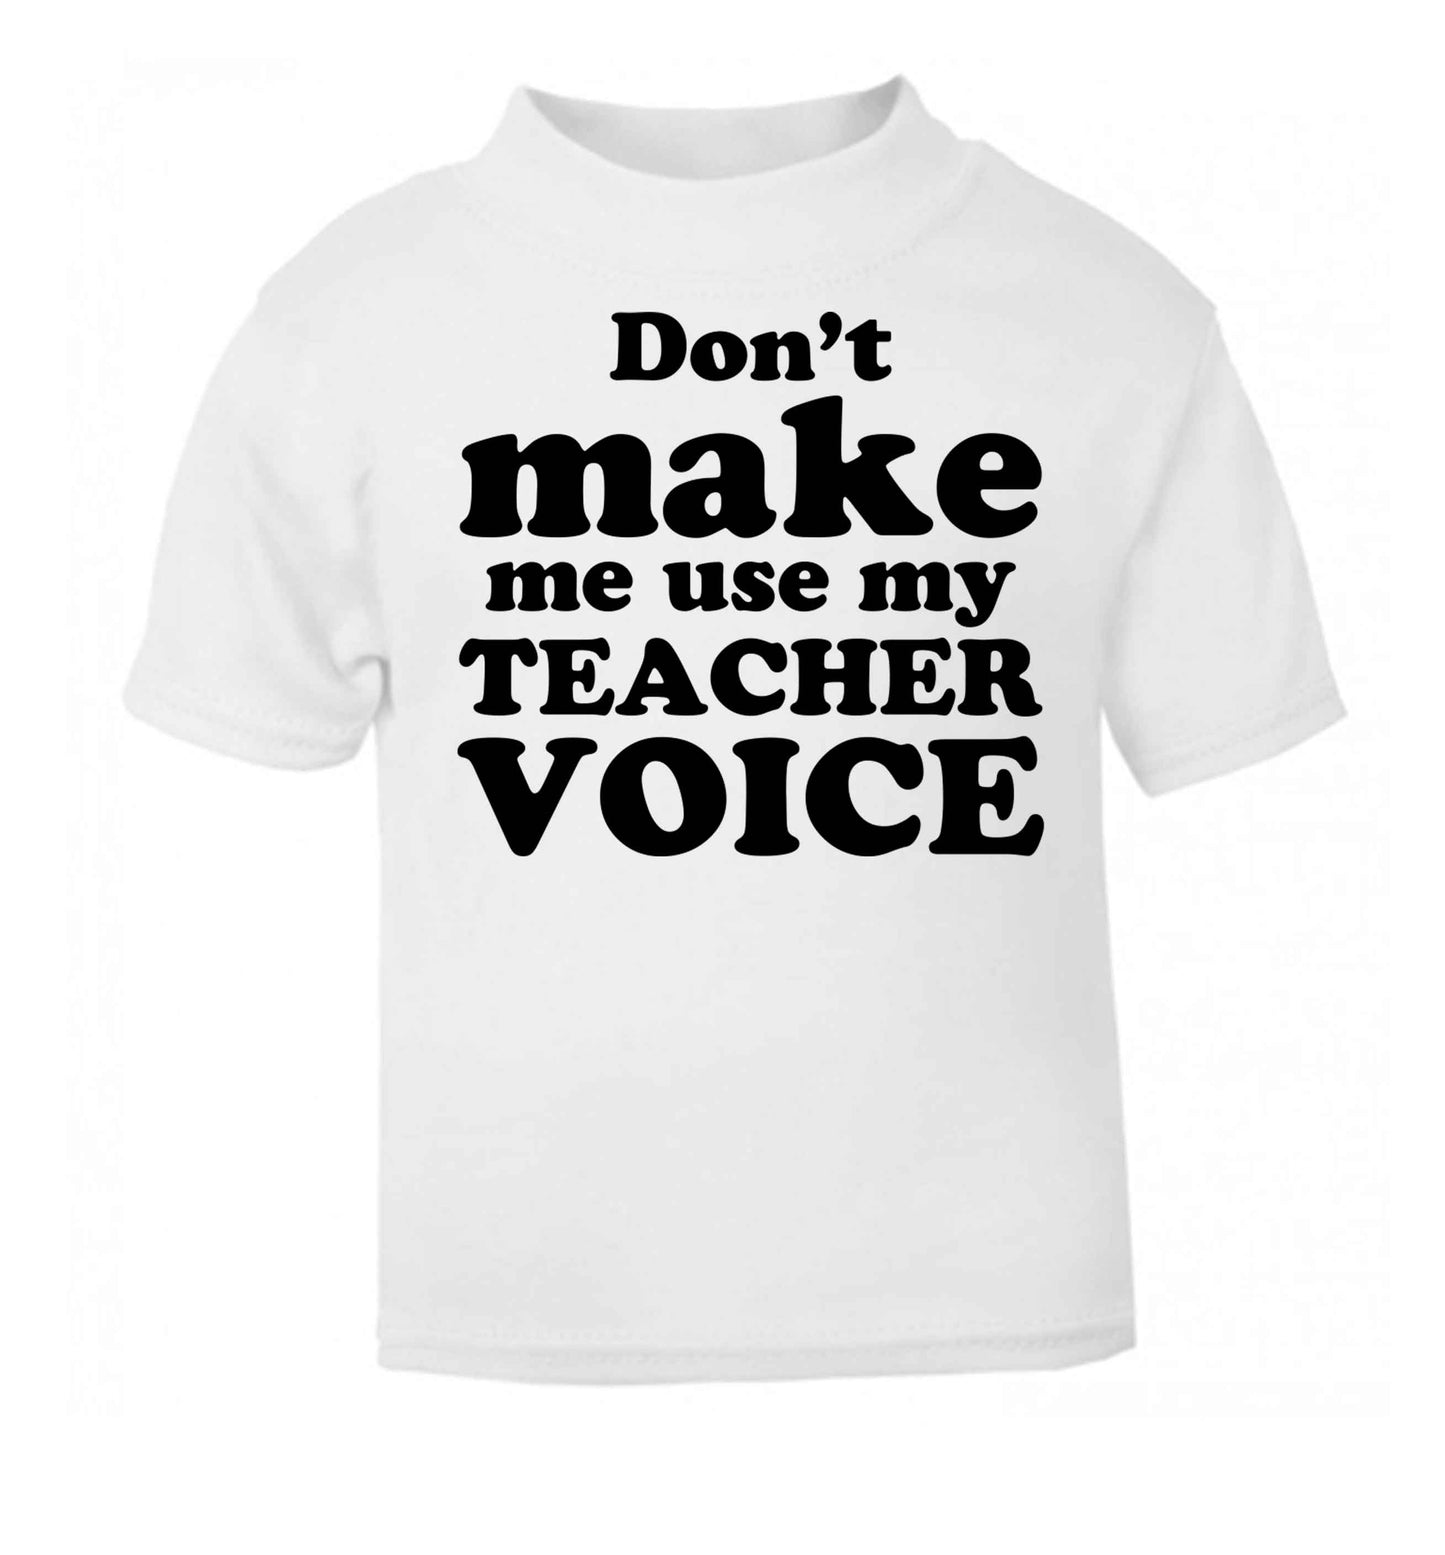 Don't make me use my teacher voice white baby toddler Tshirt 2 Years